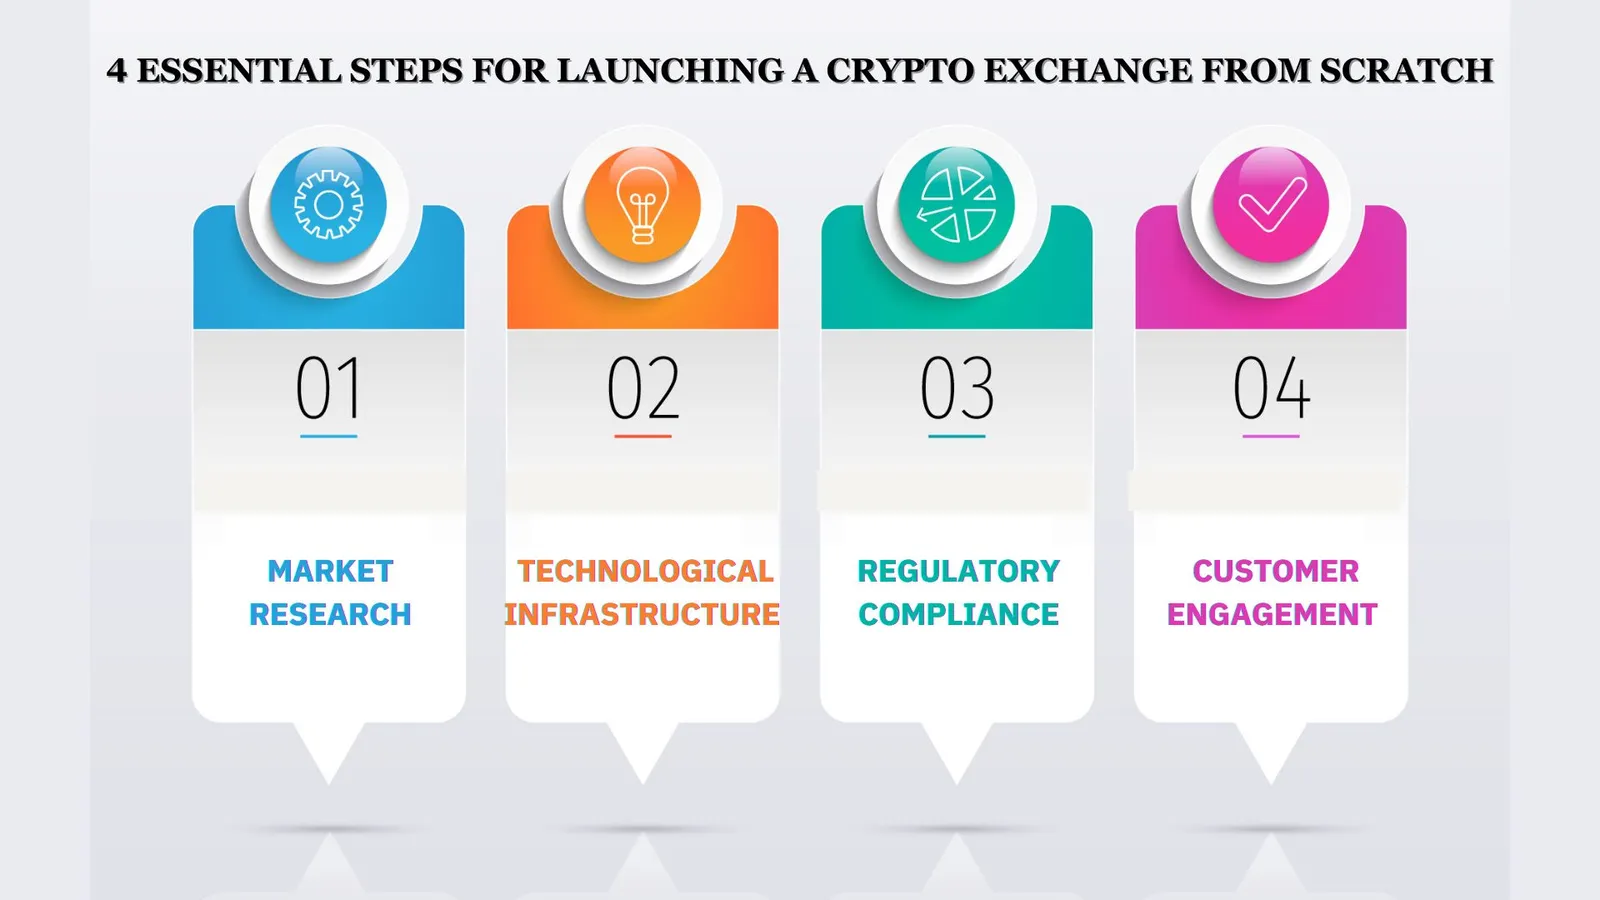 4 Essential Steps for Launching a Crypto Exchange from Scratch